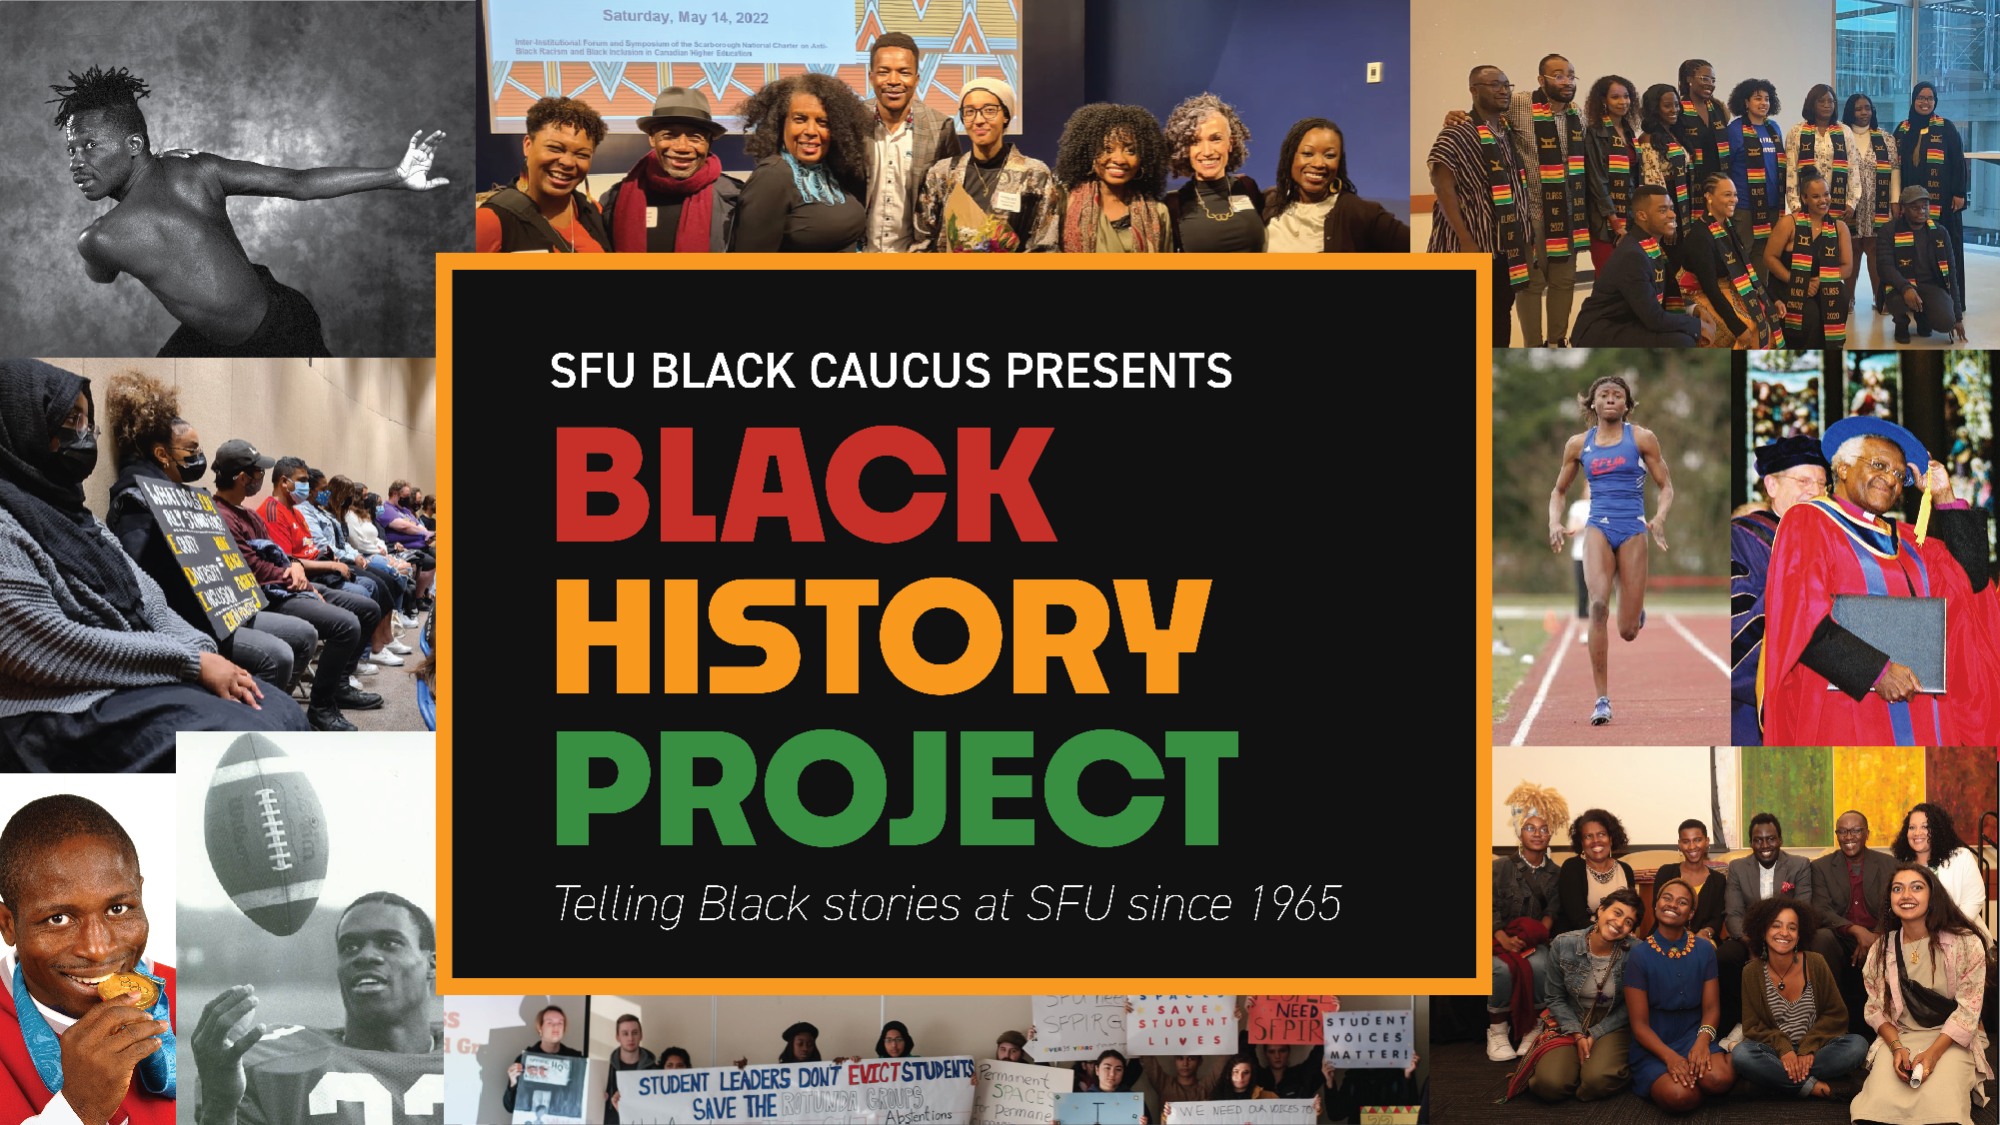 A collage of archival and new photos of the SFU Black community. In the centre foreground is a large black box that reads in white text SFU BLACK CAUCUS PRESENTS: Below in red, yellow, and green text reads BLACK HISTORY PROJECT. In smaller print below reads TELLING BLACK STORIES AT SFU SINCE 1965.